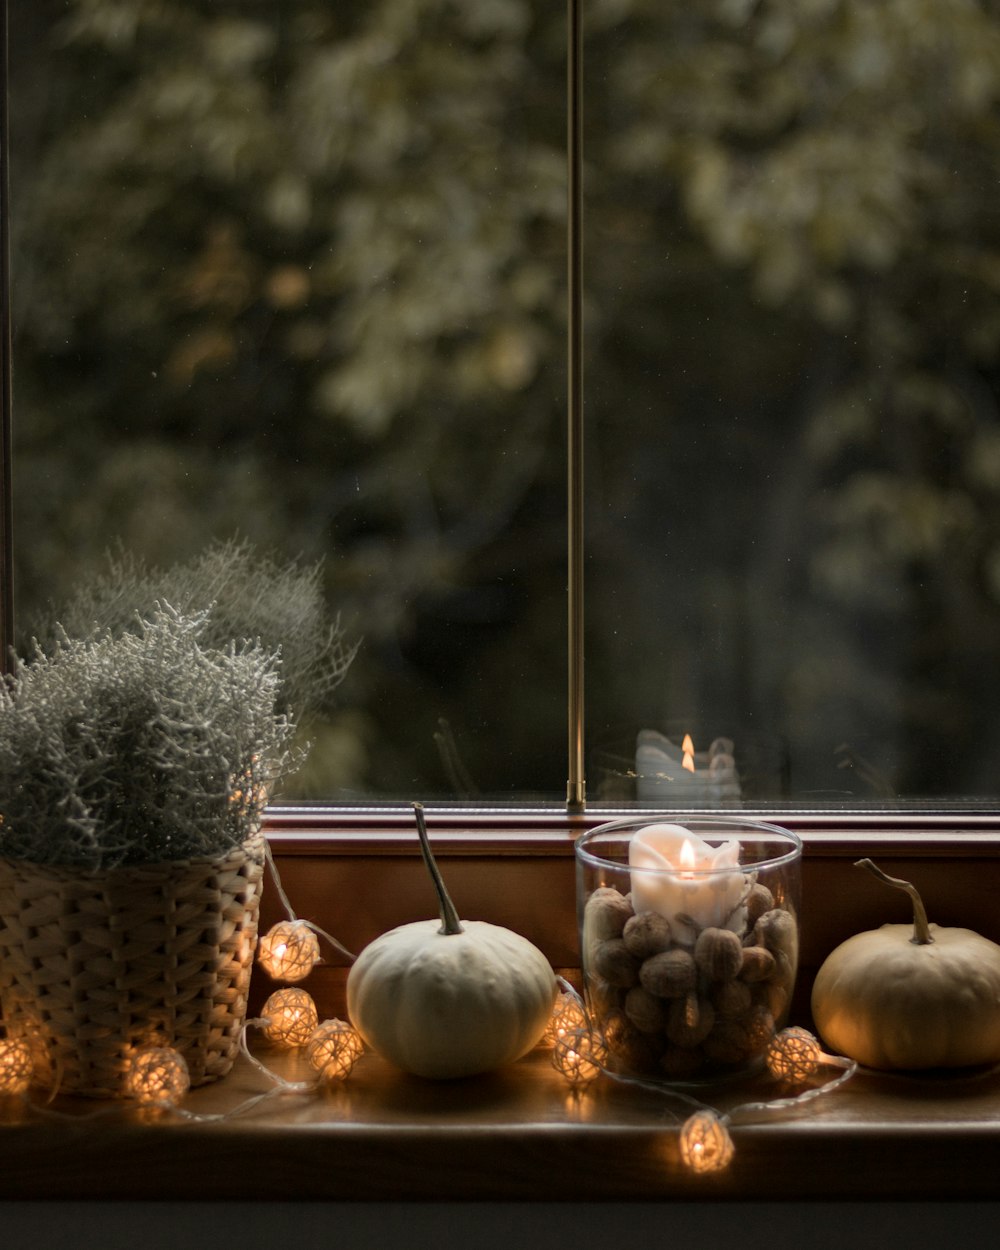 a window sill filled with pumpkins and a potted plant